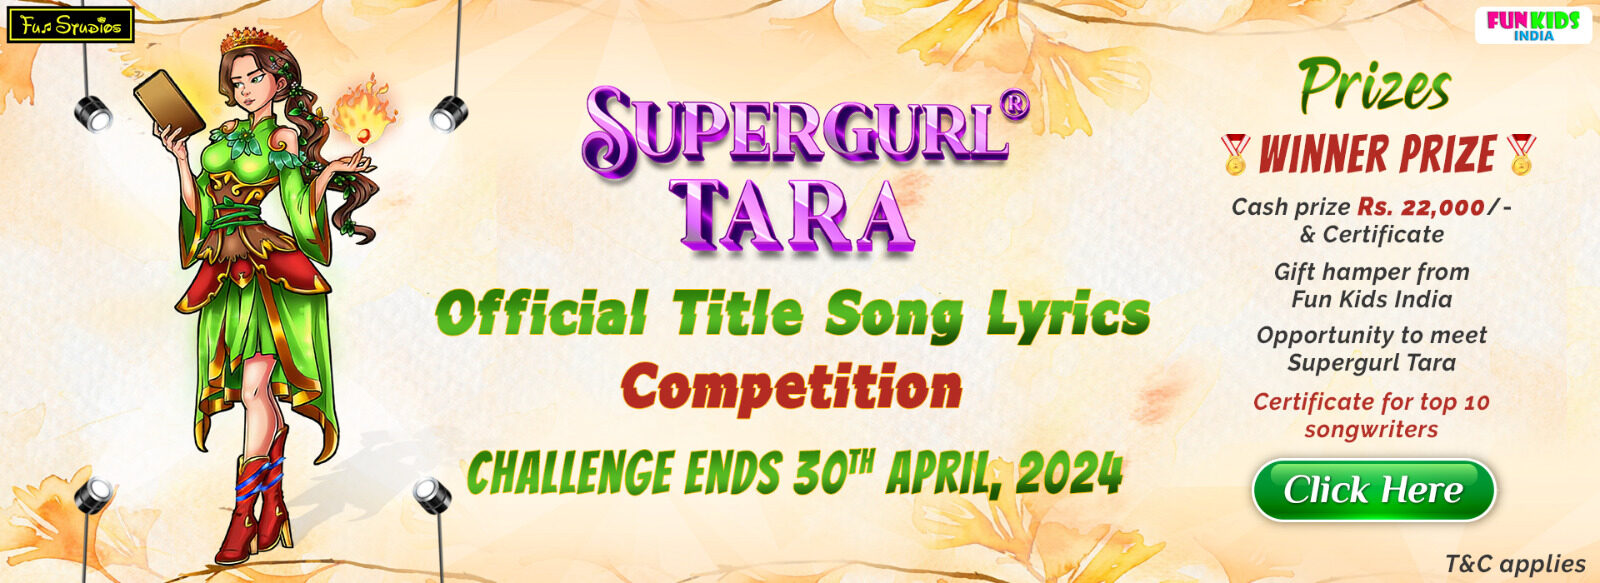 supergurl tara - official title song lyrics writing competition